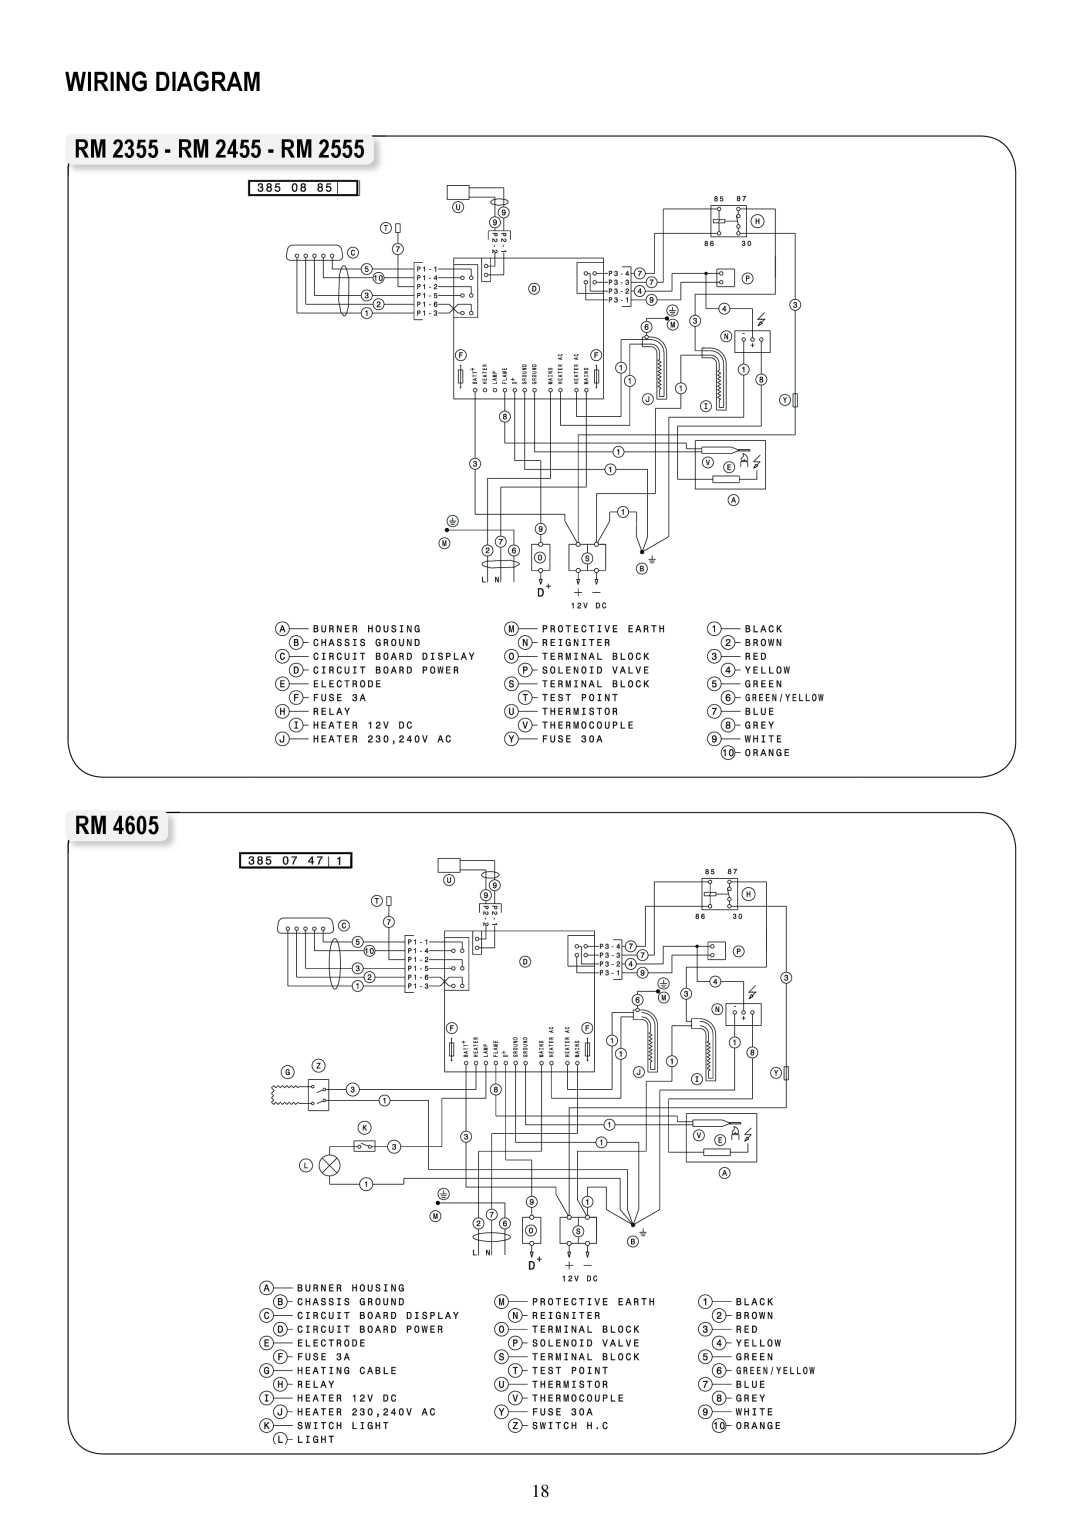 Dometic RM 2555, RM 4605 operating instructions Wiring Diagram, RM 2355 - RM 2455 - RM RM 